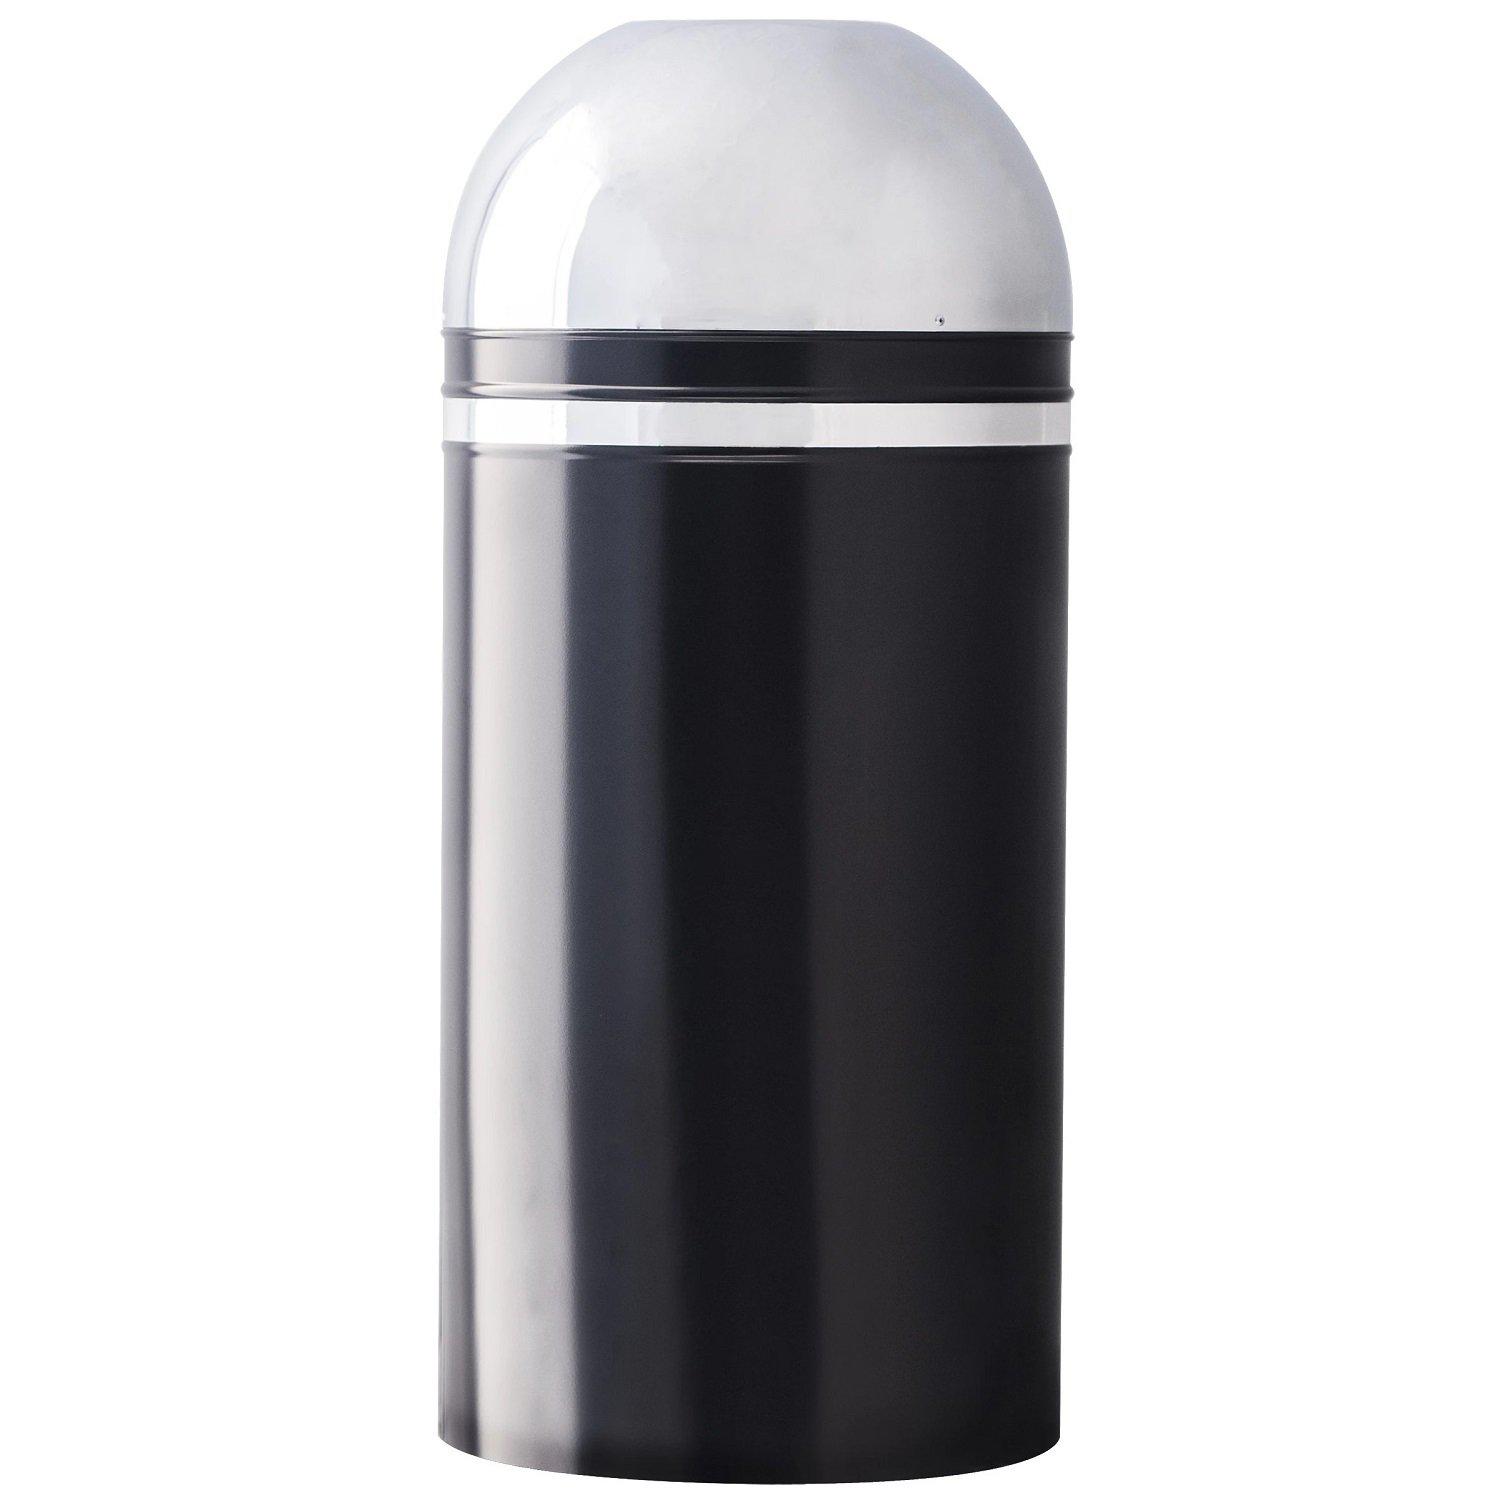 Monarch Series Open Dome Top Indoor Waste Receptacle, 15-Gallon Capacity, Black with Chrome Accents